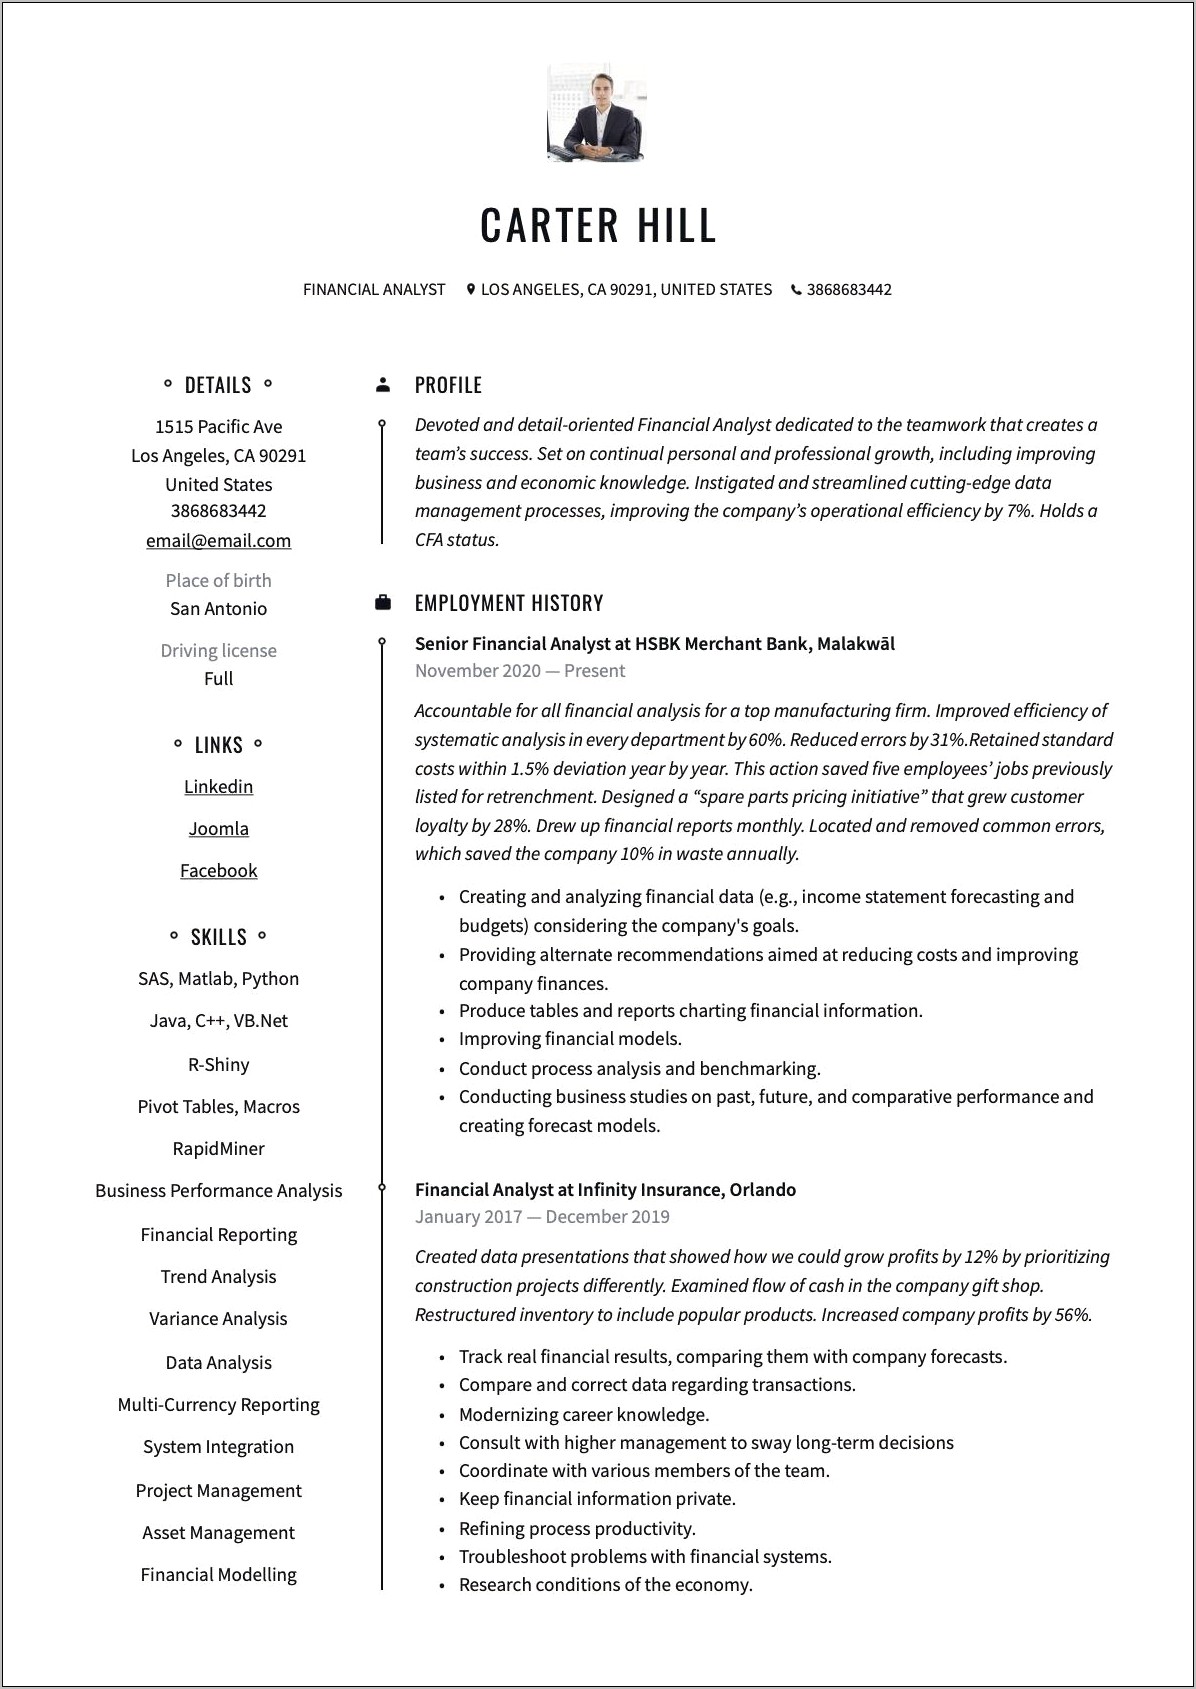 Private Equity Analyst Resume Example